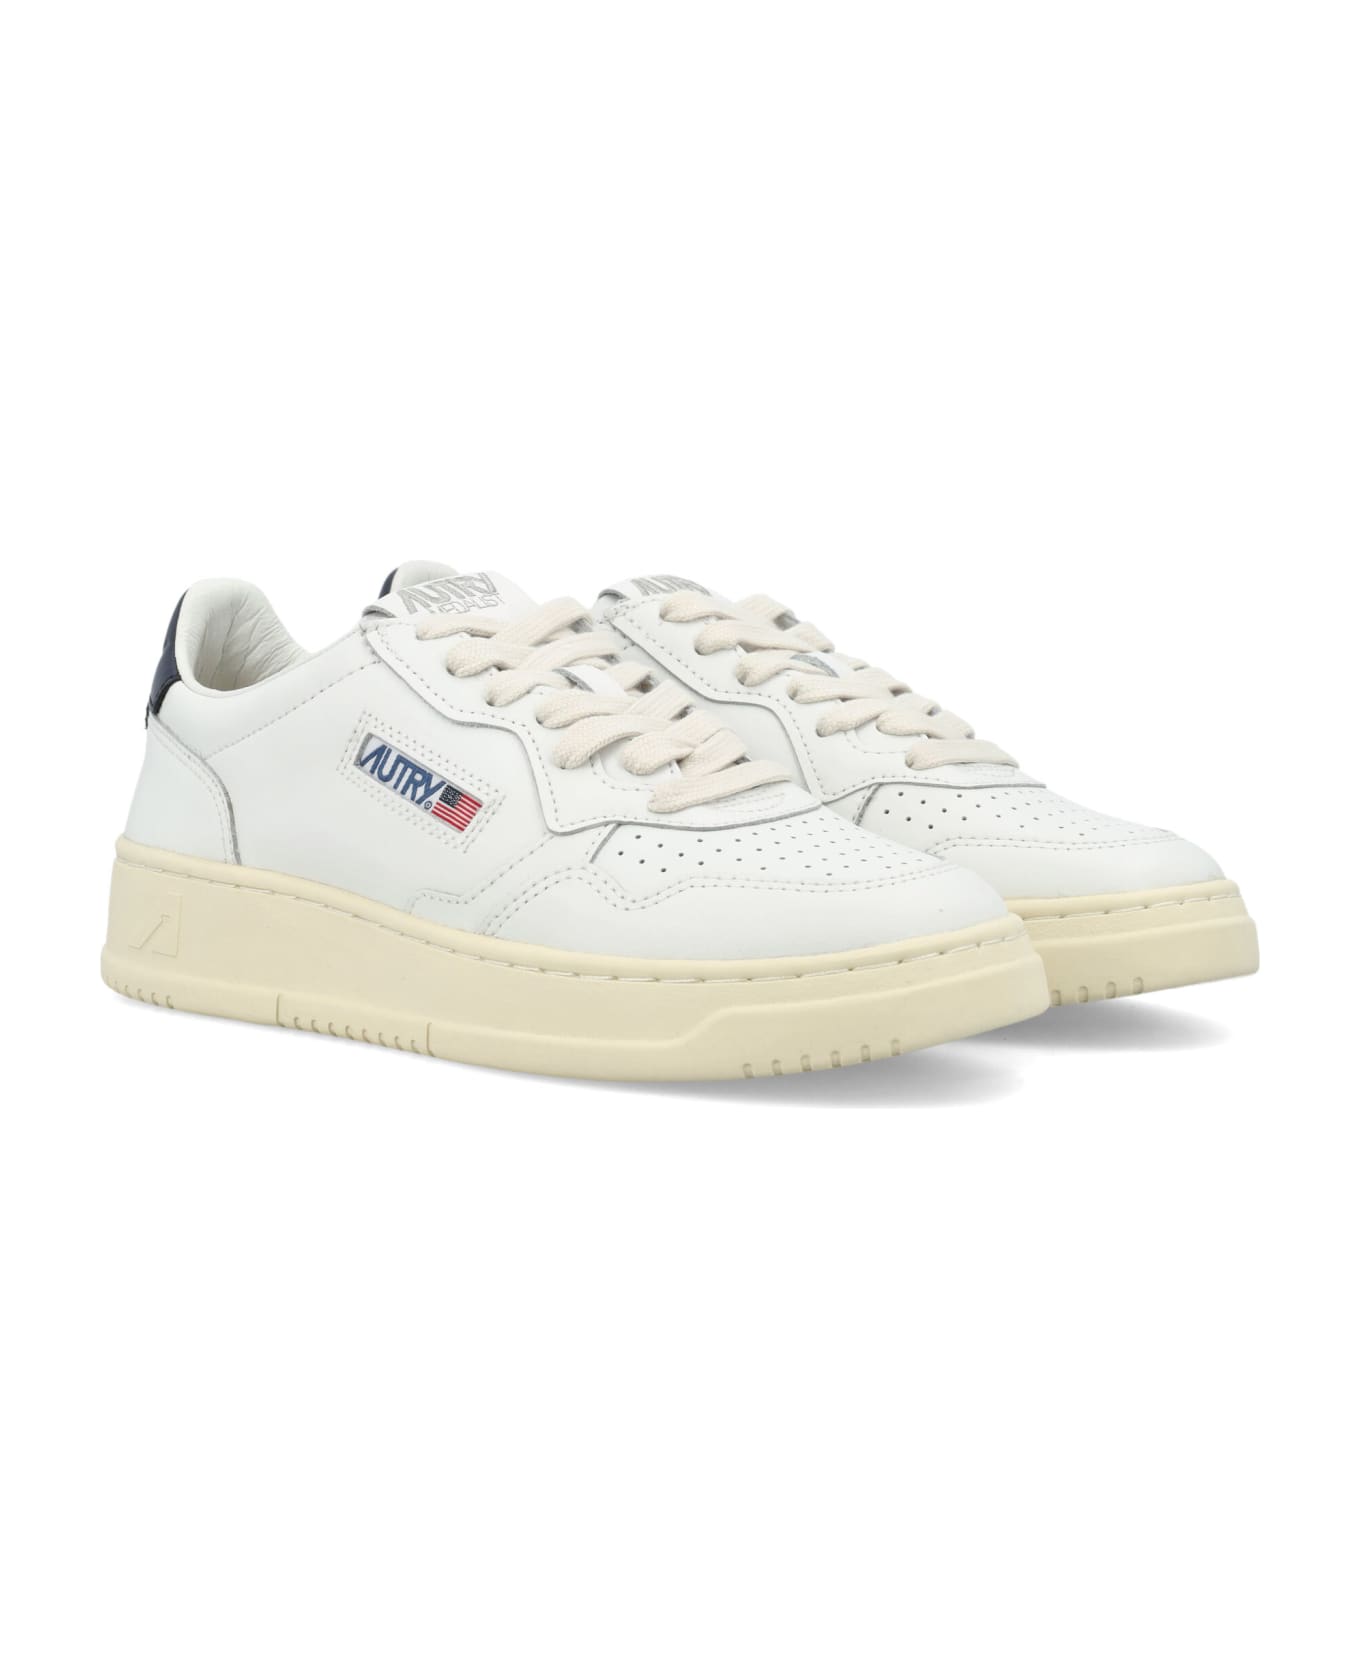 Autry Medalist Low Sneakers Women - WHITE NAVY